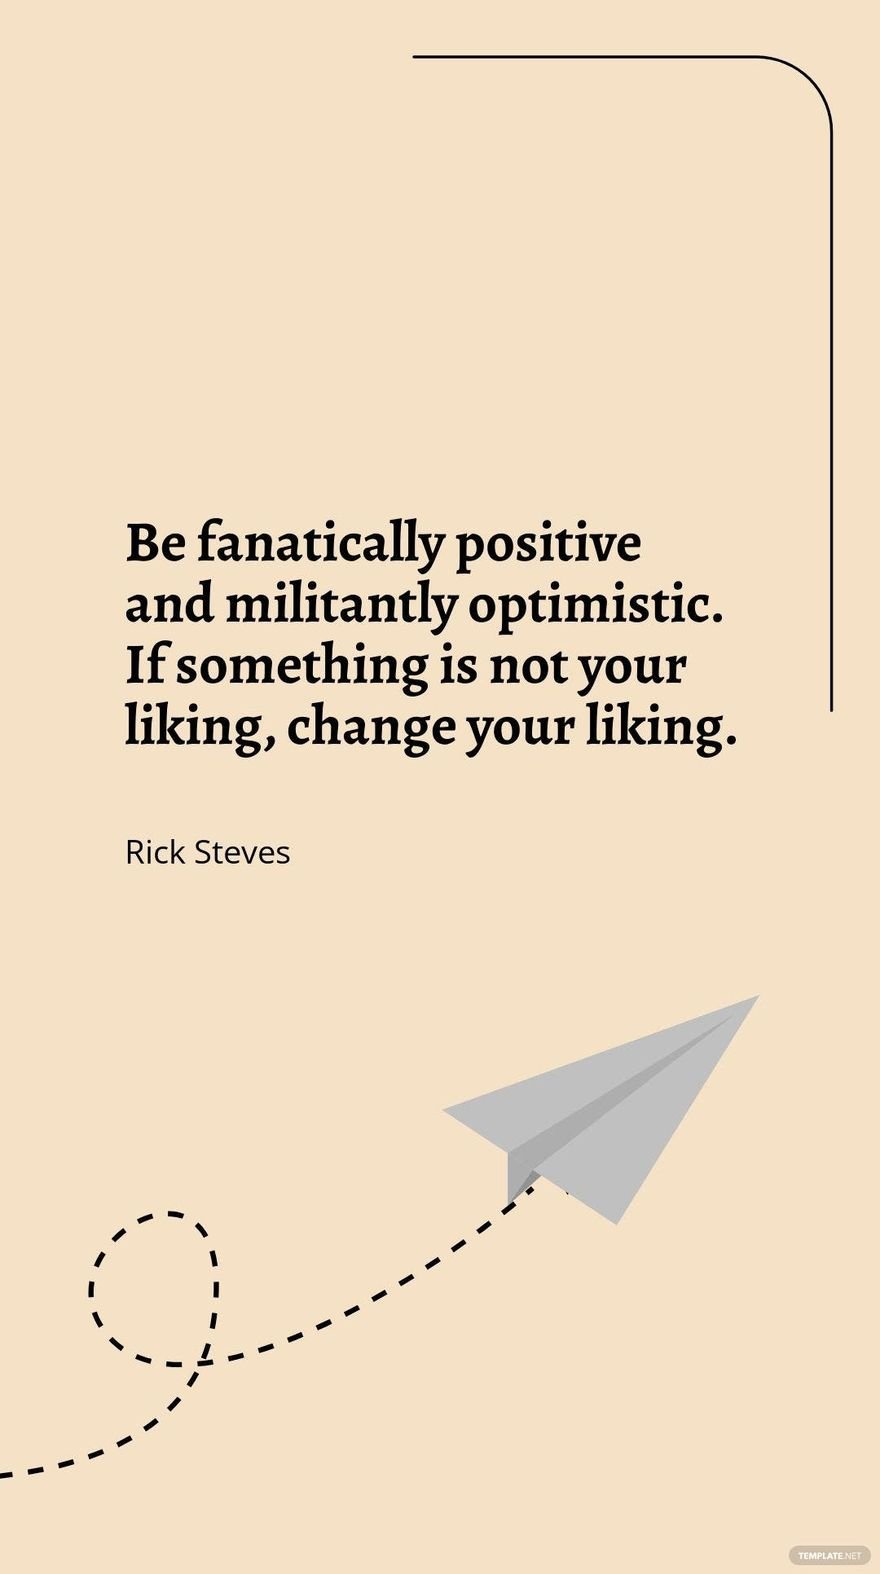 Rick Steves - Be fanatically positive and militantly optimistic. If something is not your liking, change your liking.